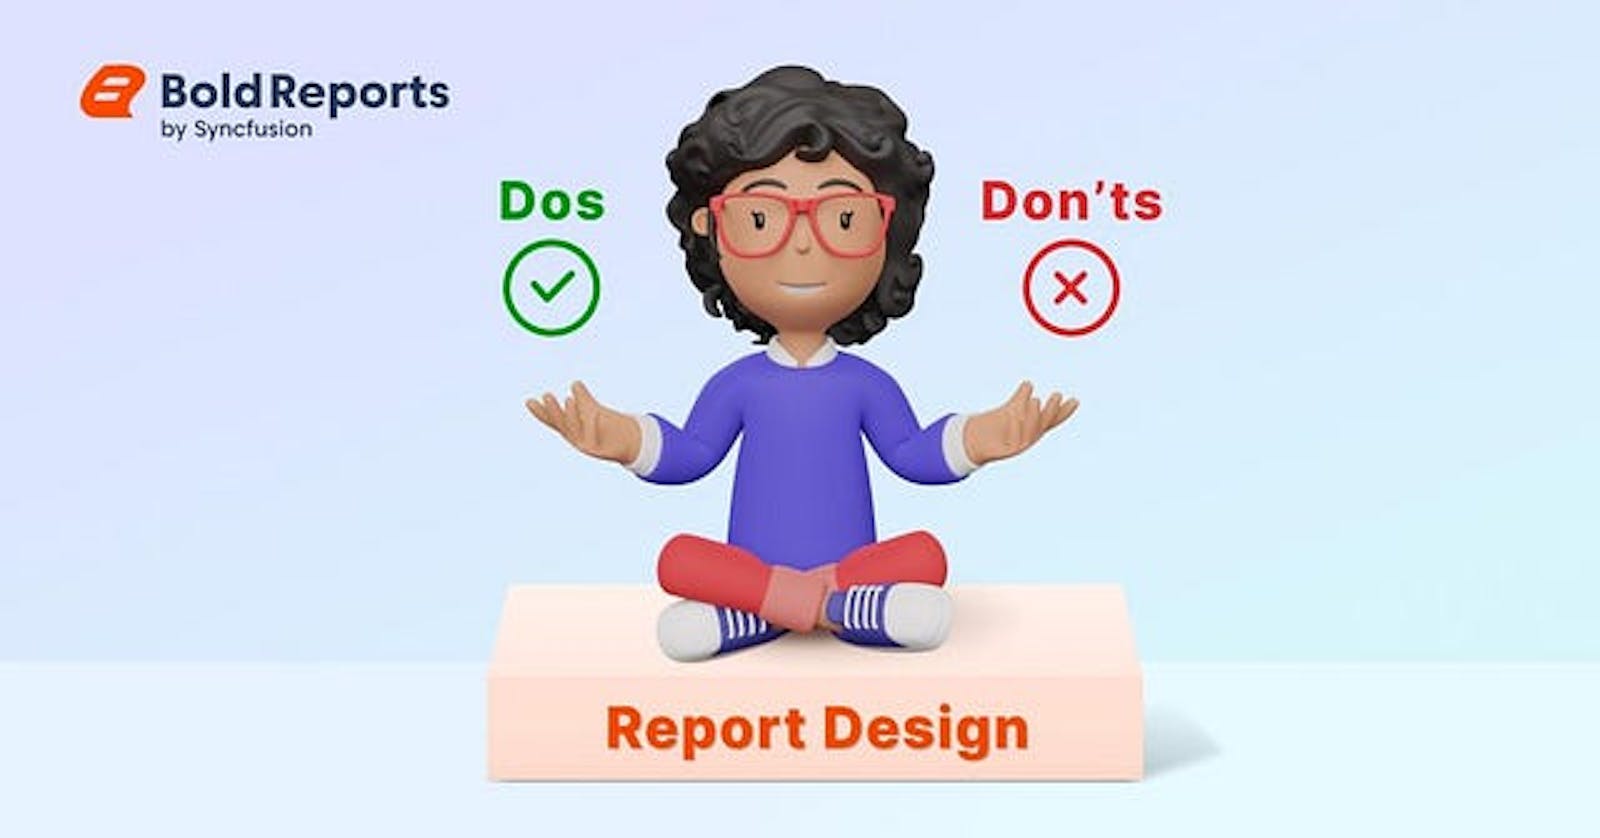 The Dos and Don’ts of Report Design